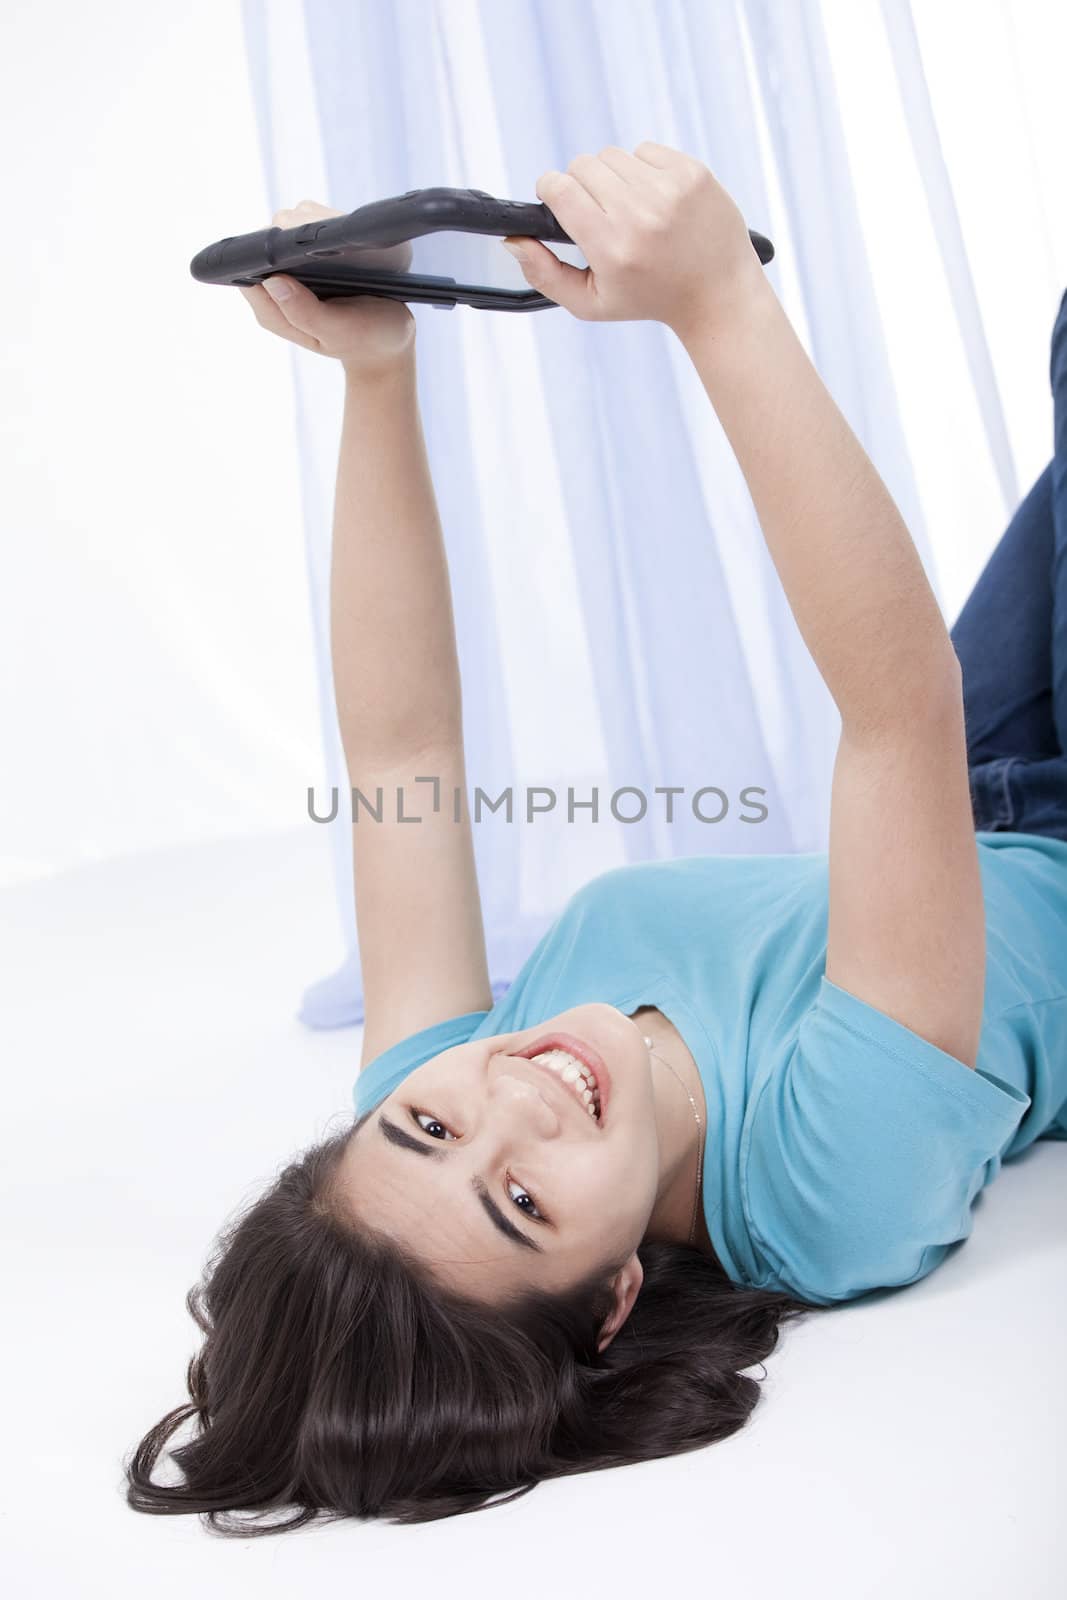 Teen girl playing with tablet computer on the floor by jarenwicklund